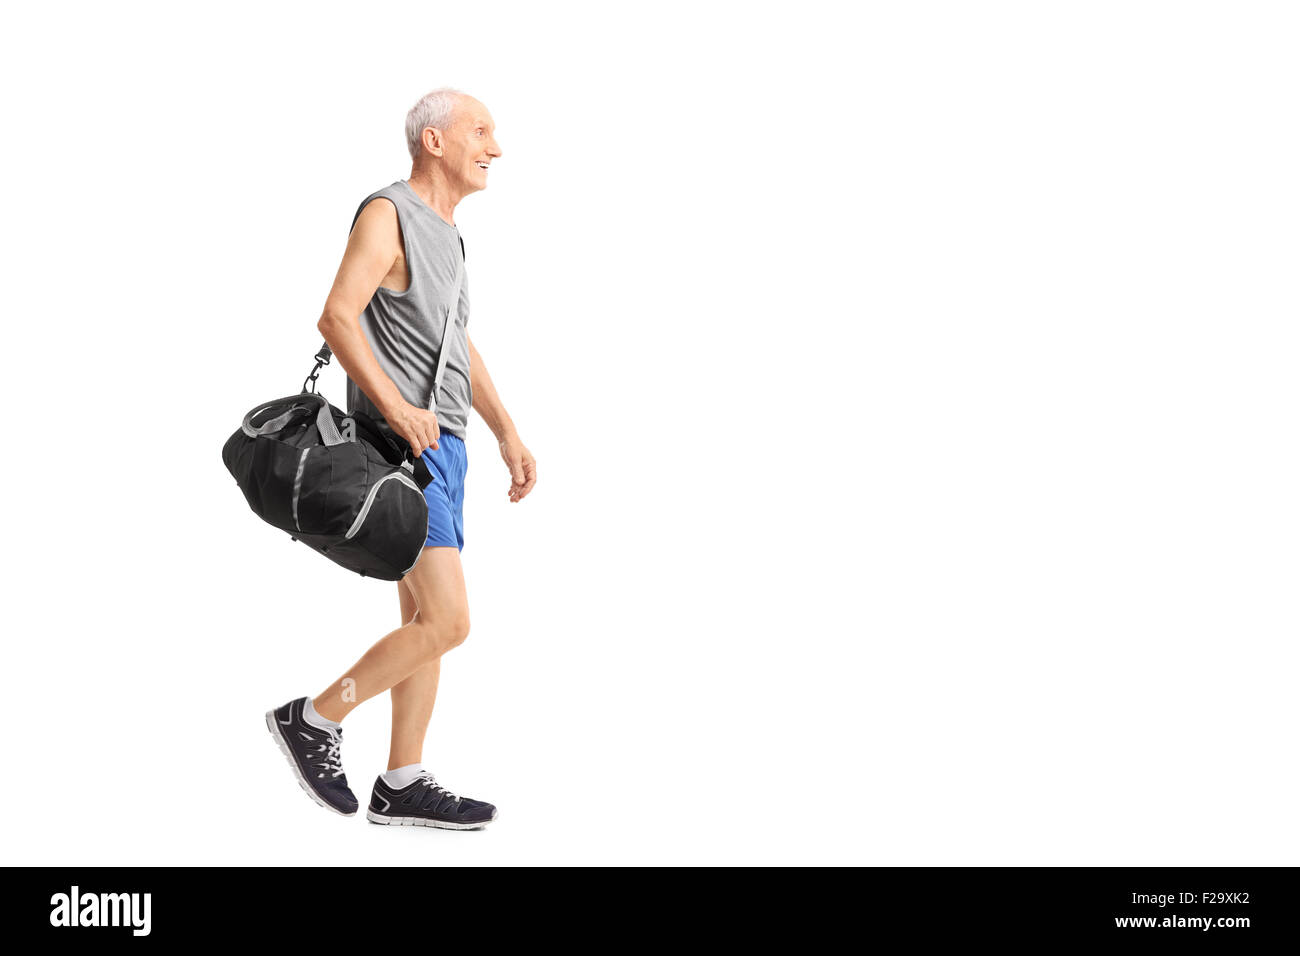 Full length profile shot of a senior man walking and carrying a sports bag isolated on white background Stock Photo